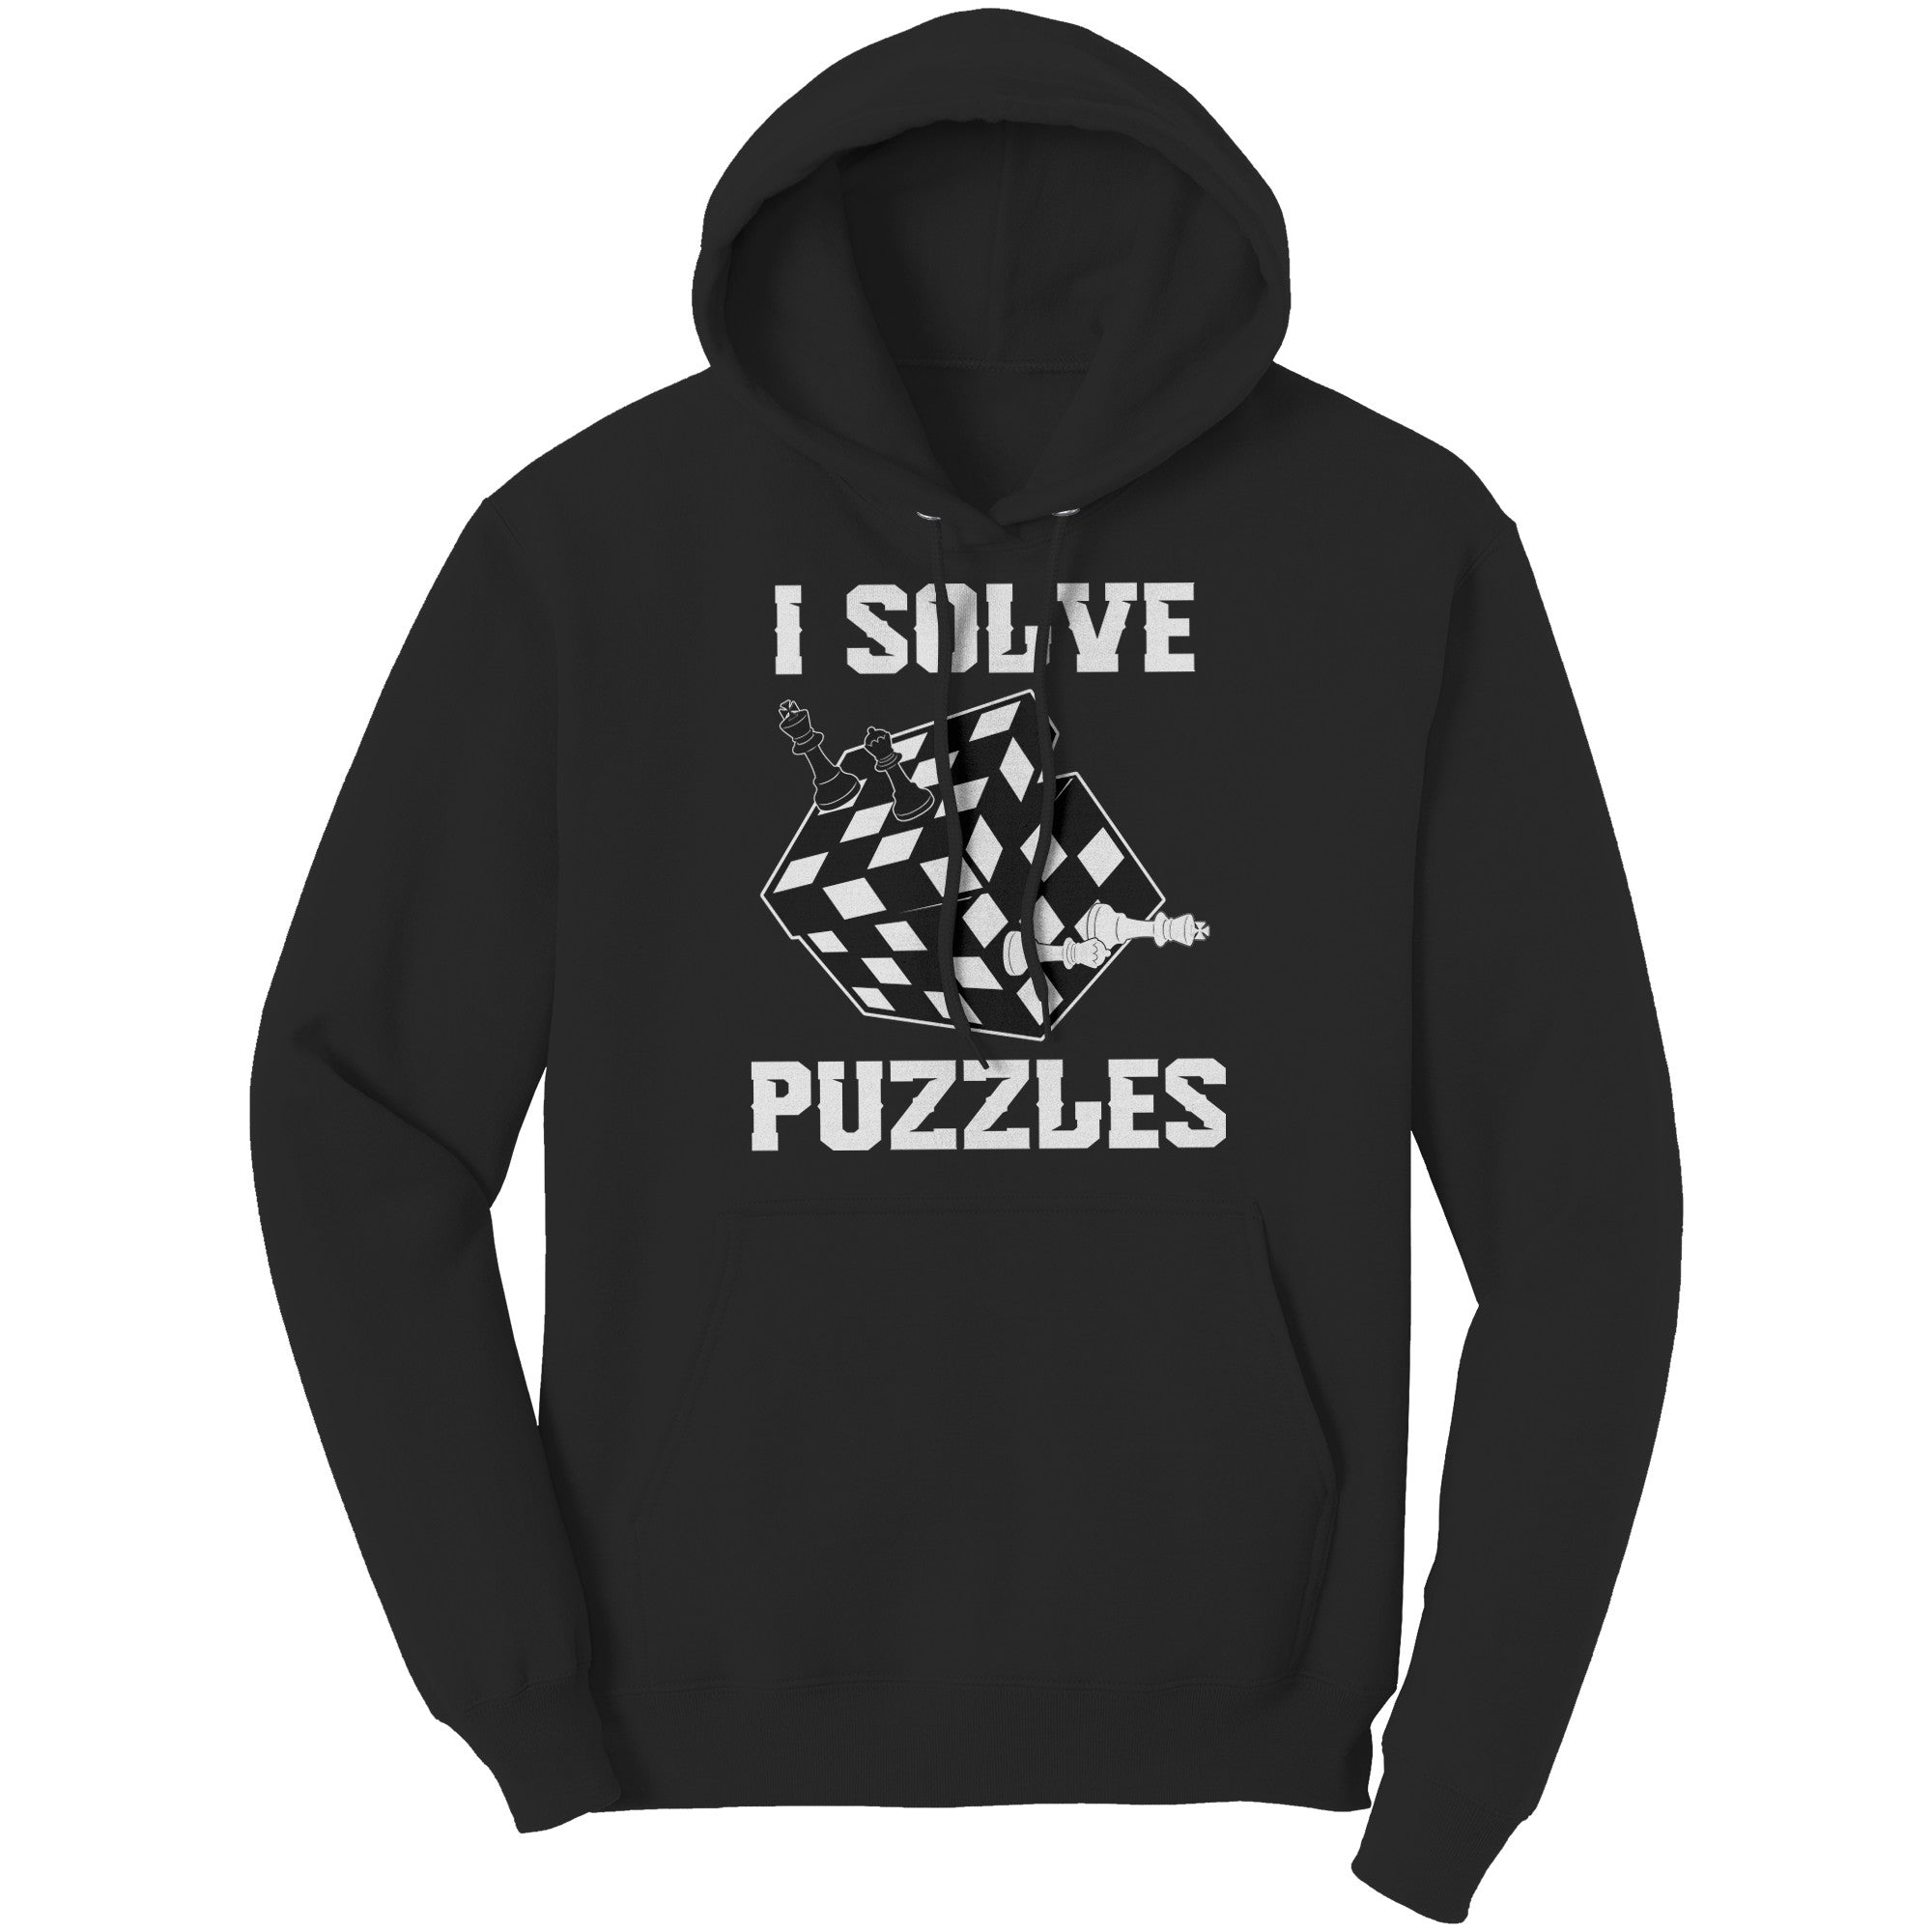 Solve Puzzles - Rubick's Cube and Chess - Unisex Hoodie